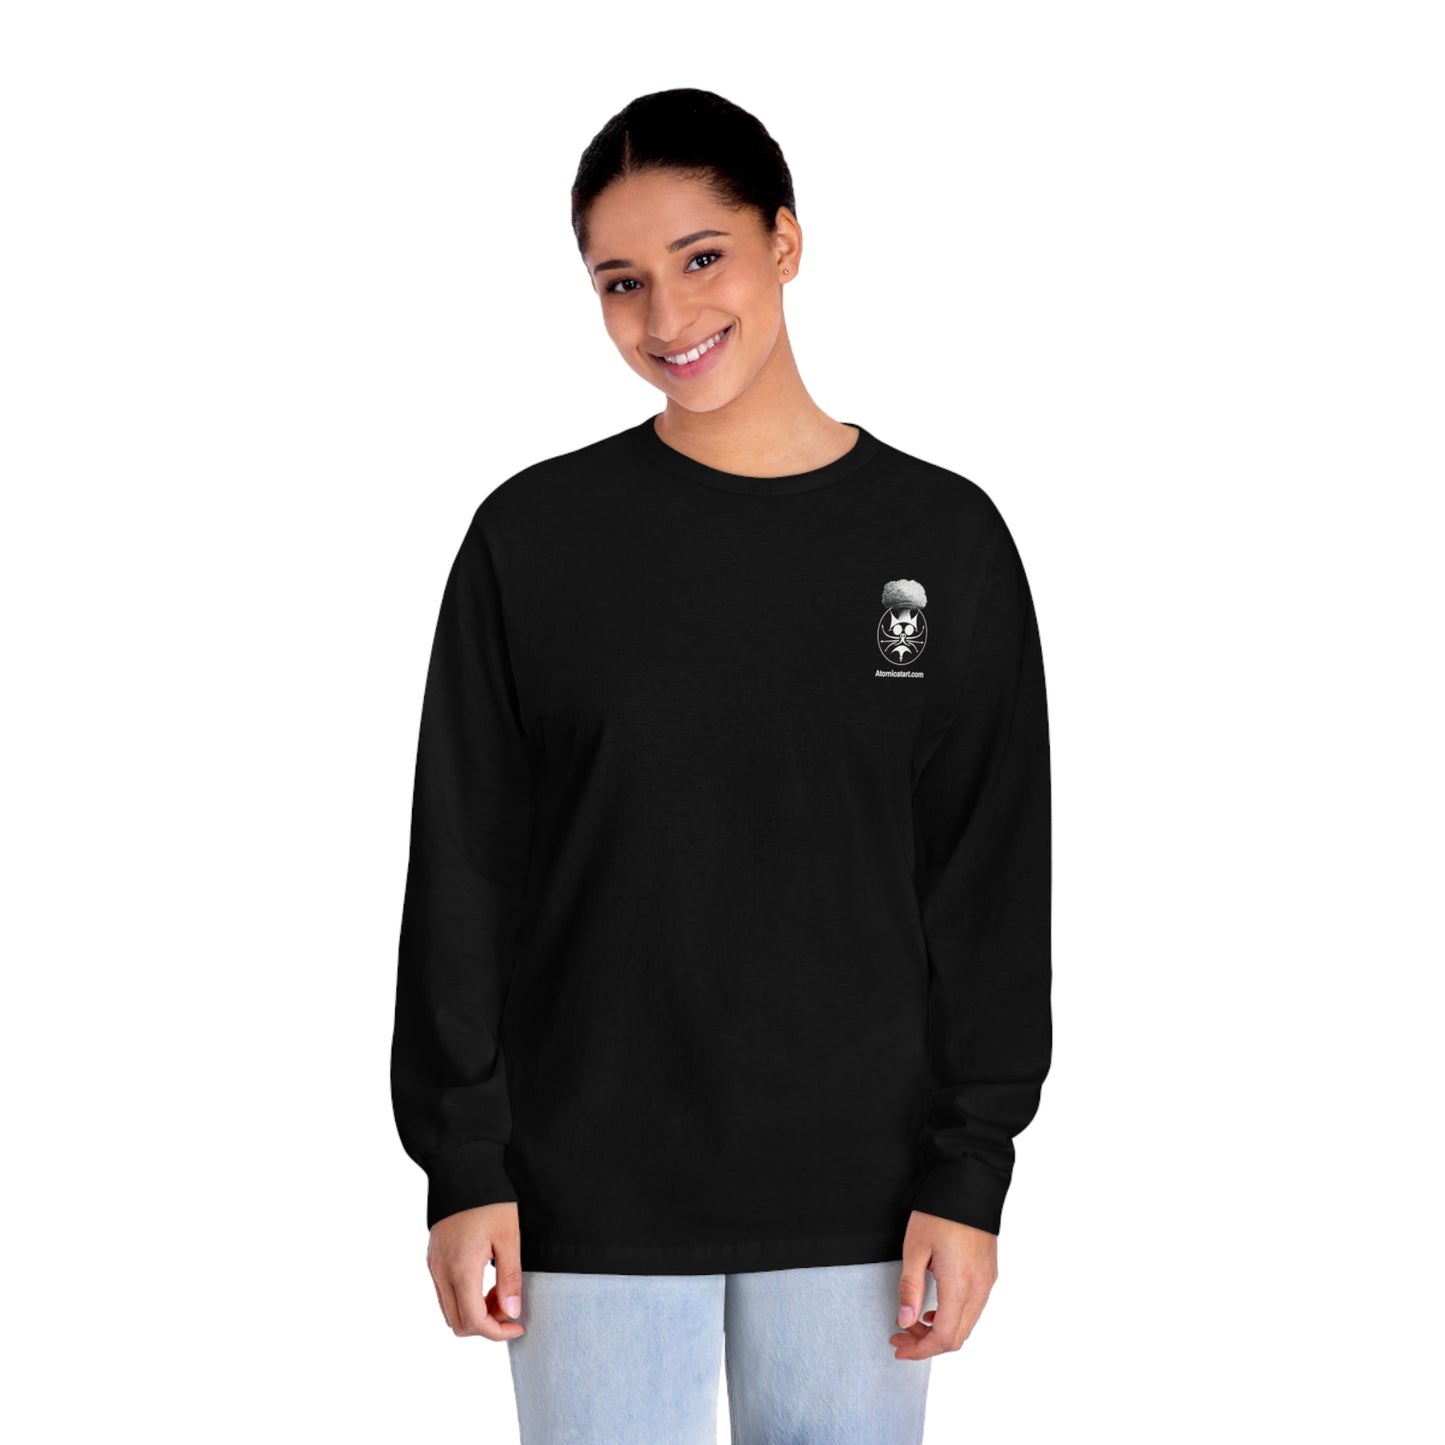 Phone Abduction - Long sleeve - Front logo